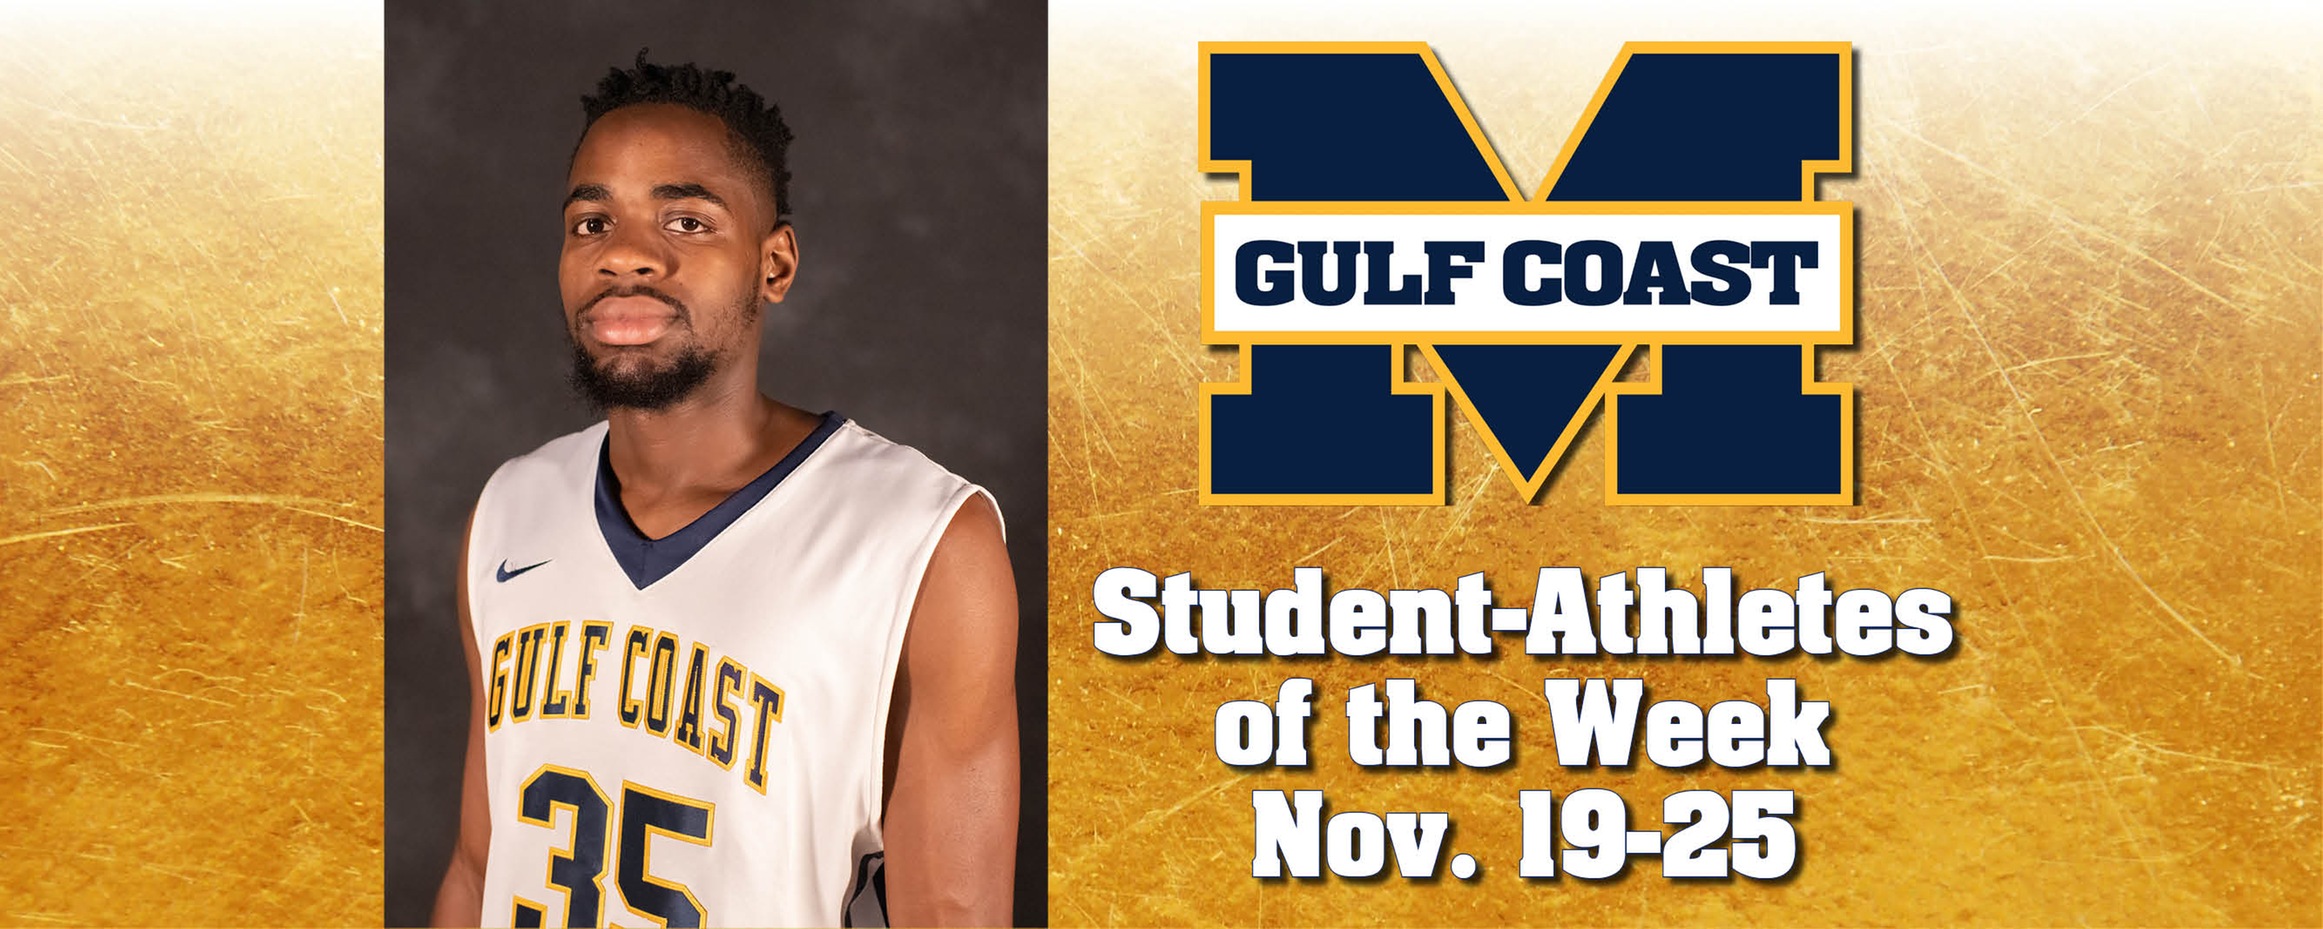 Simms named MGCCC Student-Athlete of the Week